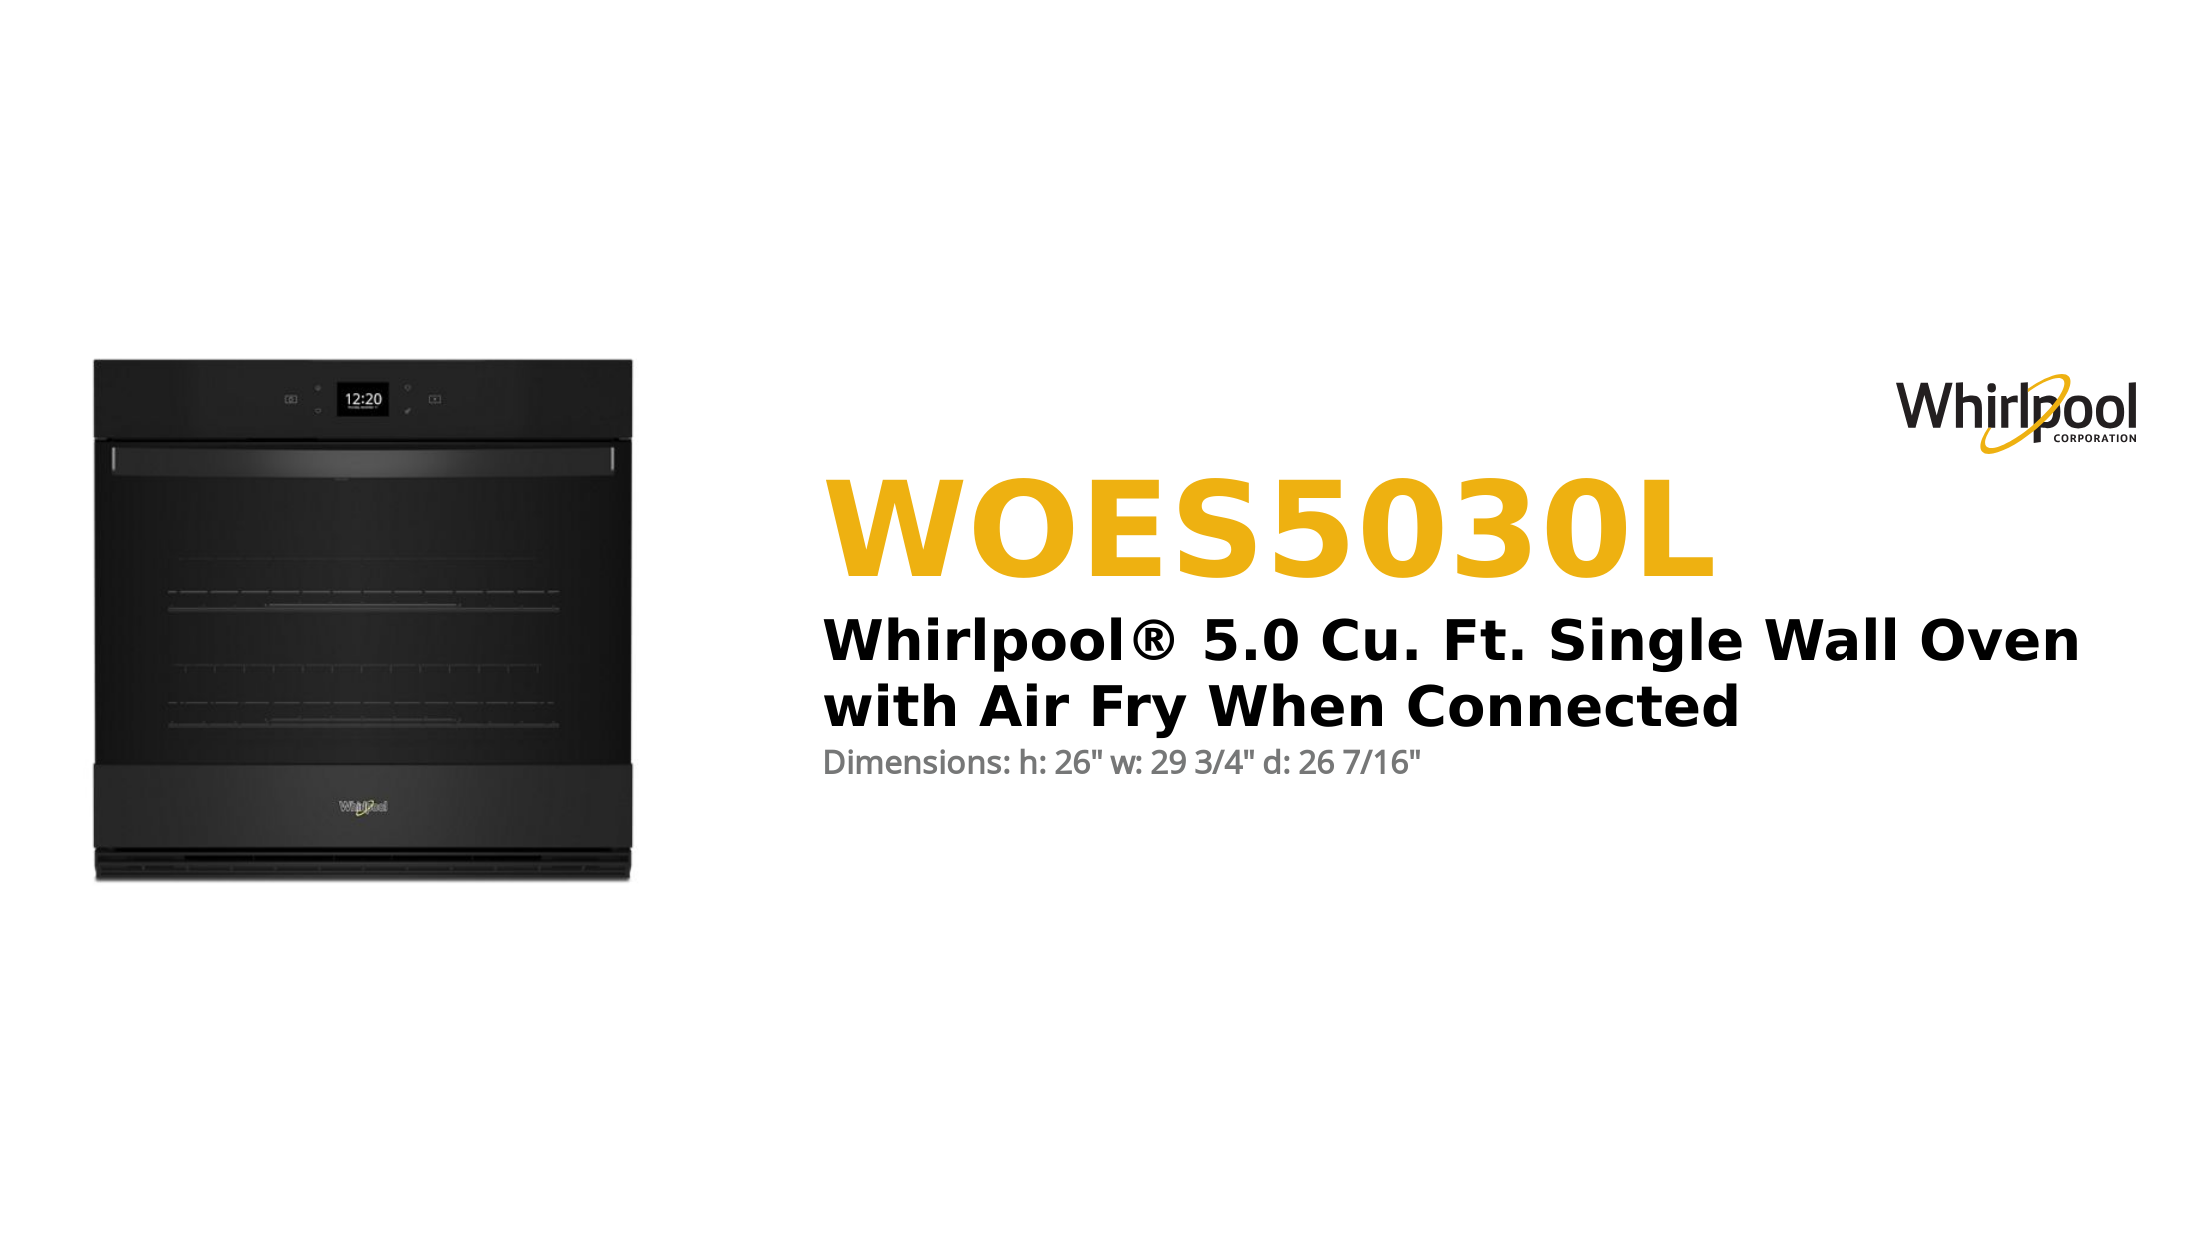 



WHIRLPOOL® 5.0 CU. FT. SINGLE WALL OVEN WITH AIR FRY WHEN CONNECTED



